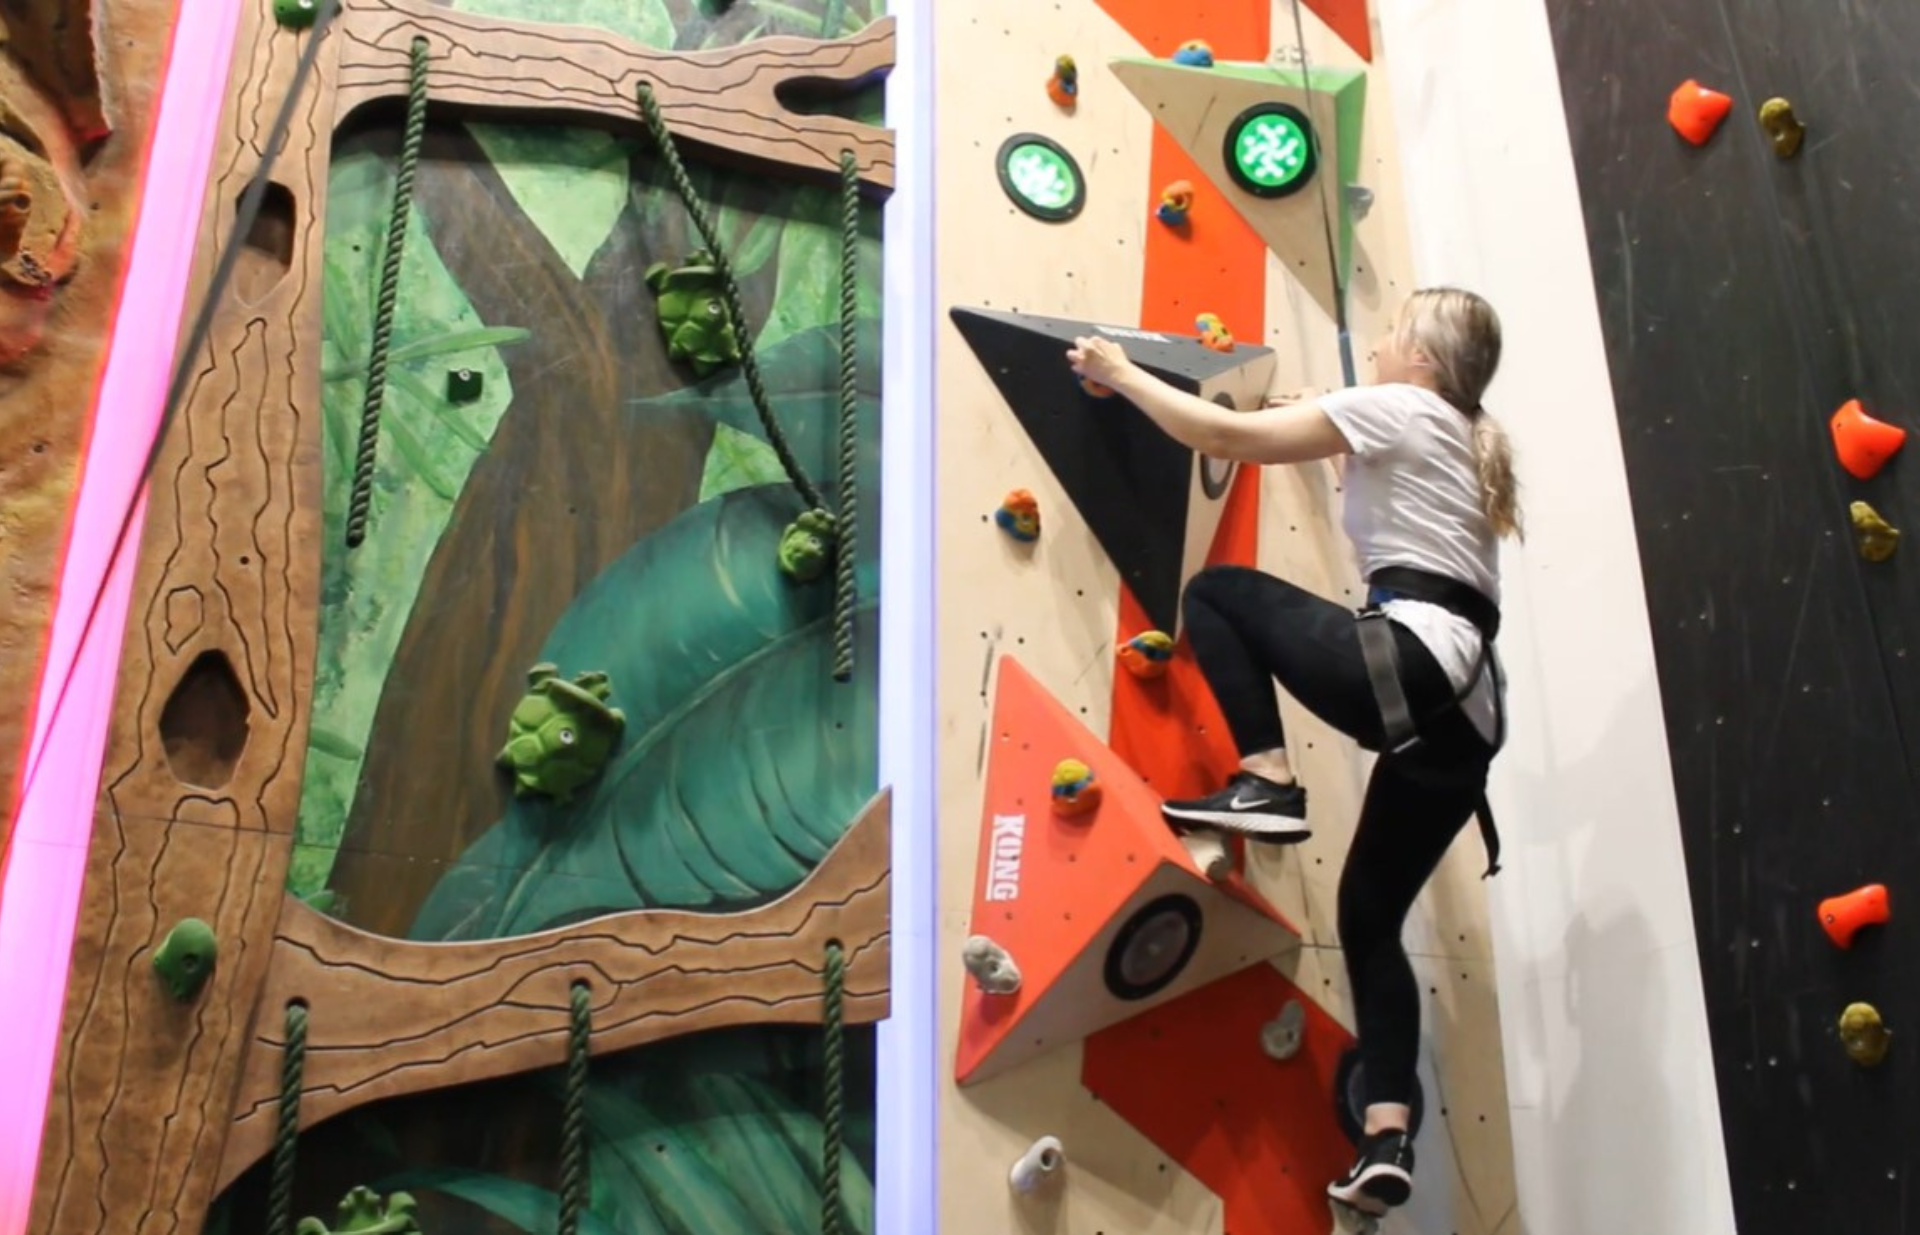 Add interactive pods and scoring system to any climbing wall